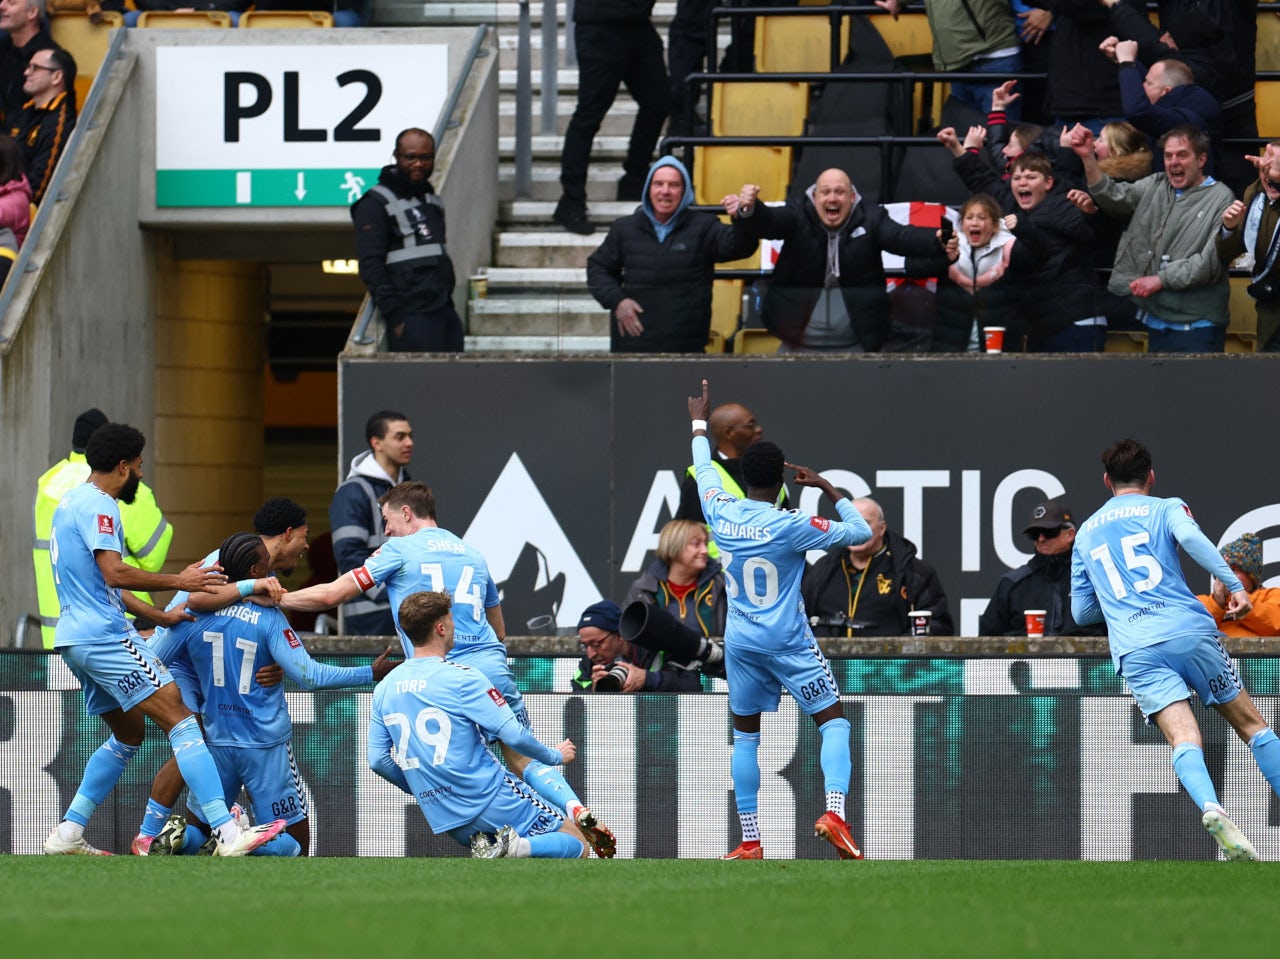 Coventry City net twice in added-on time to beat Wolves and reach FA Cup semi-finals